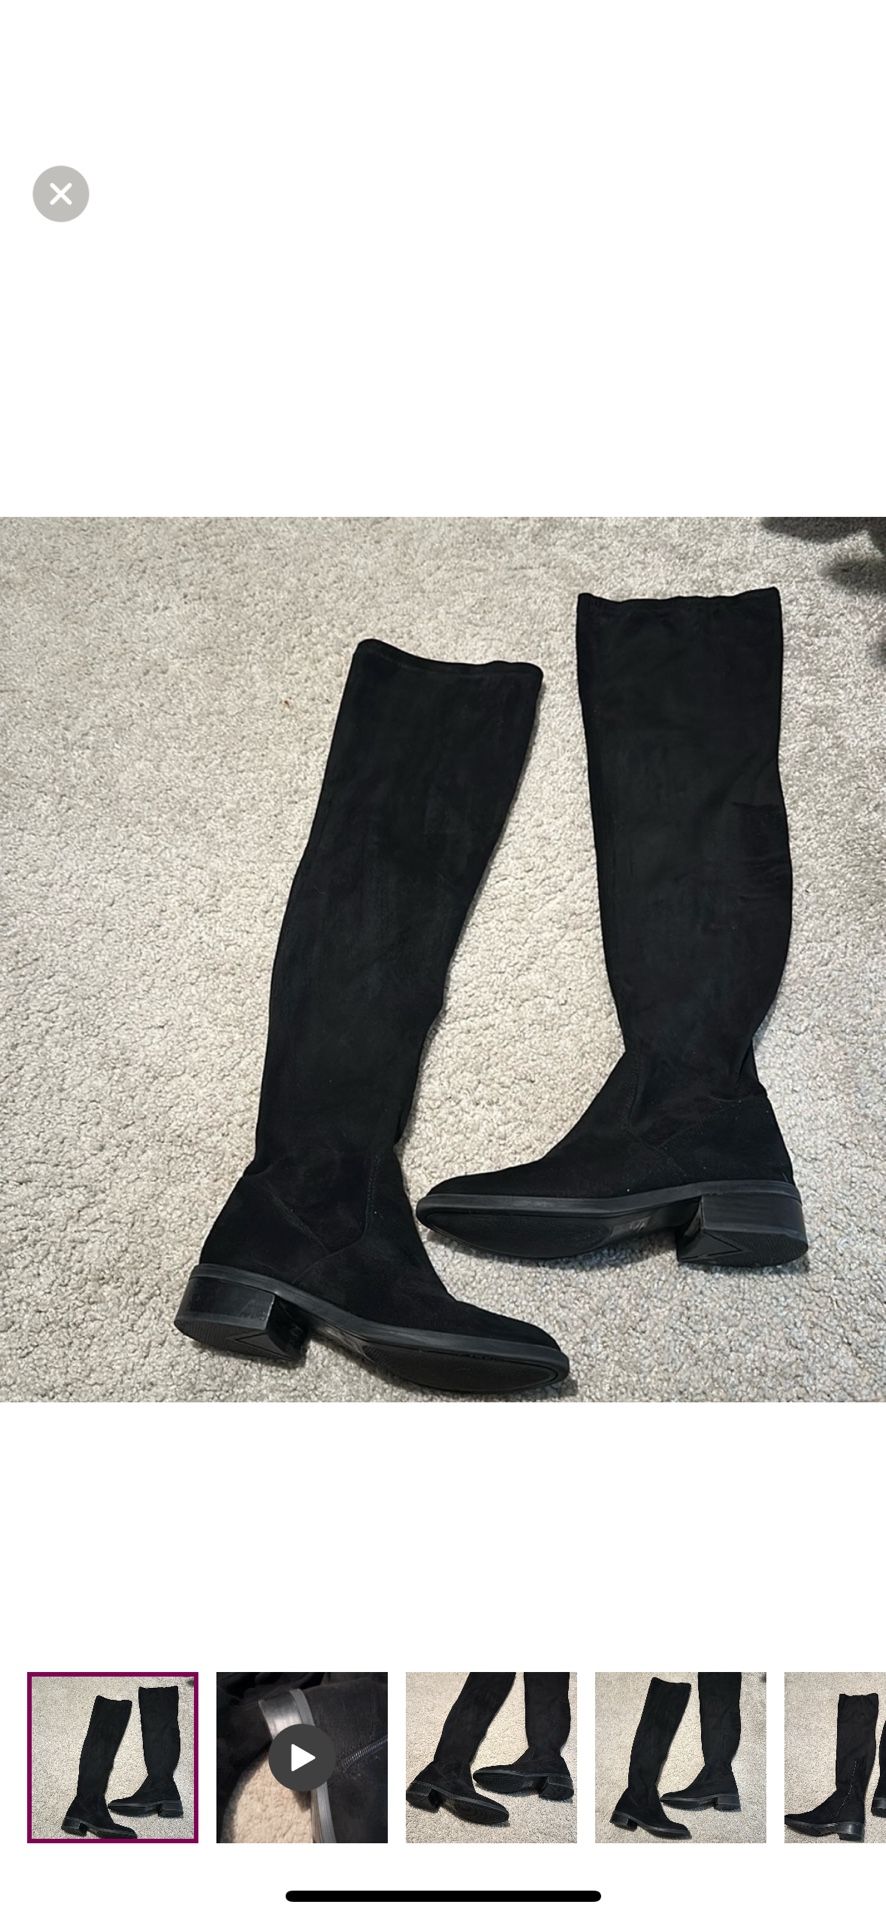 Aldo And Other Boots Bundle